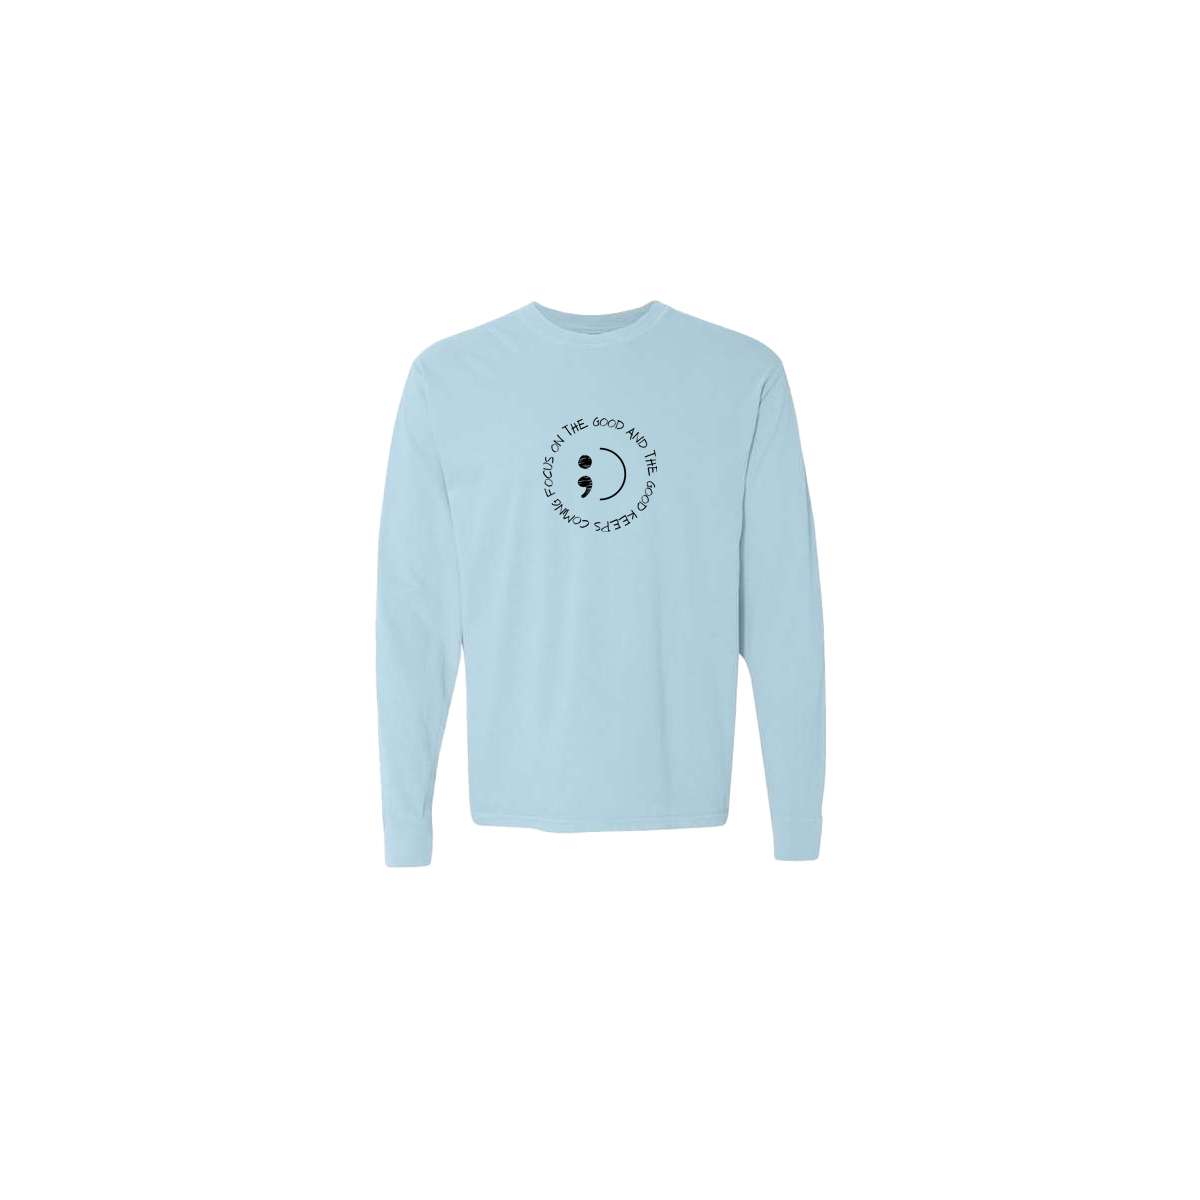 Focus on The Good And The Good Keeps Coming Embroidered Light Blue Long Sleeve Tshirt - Mental Health Awareness Clothing